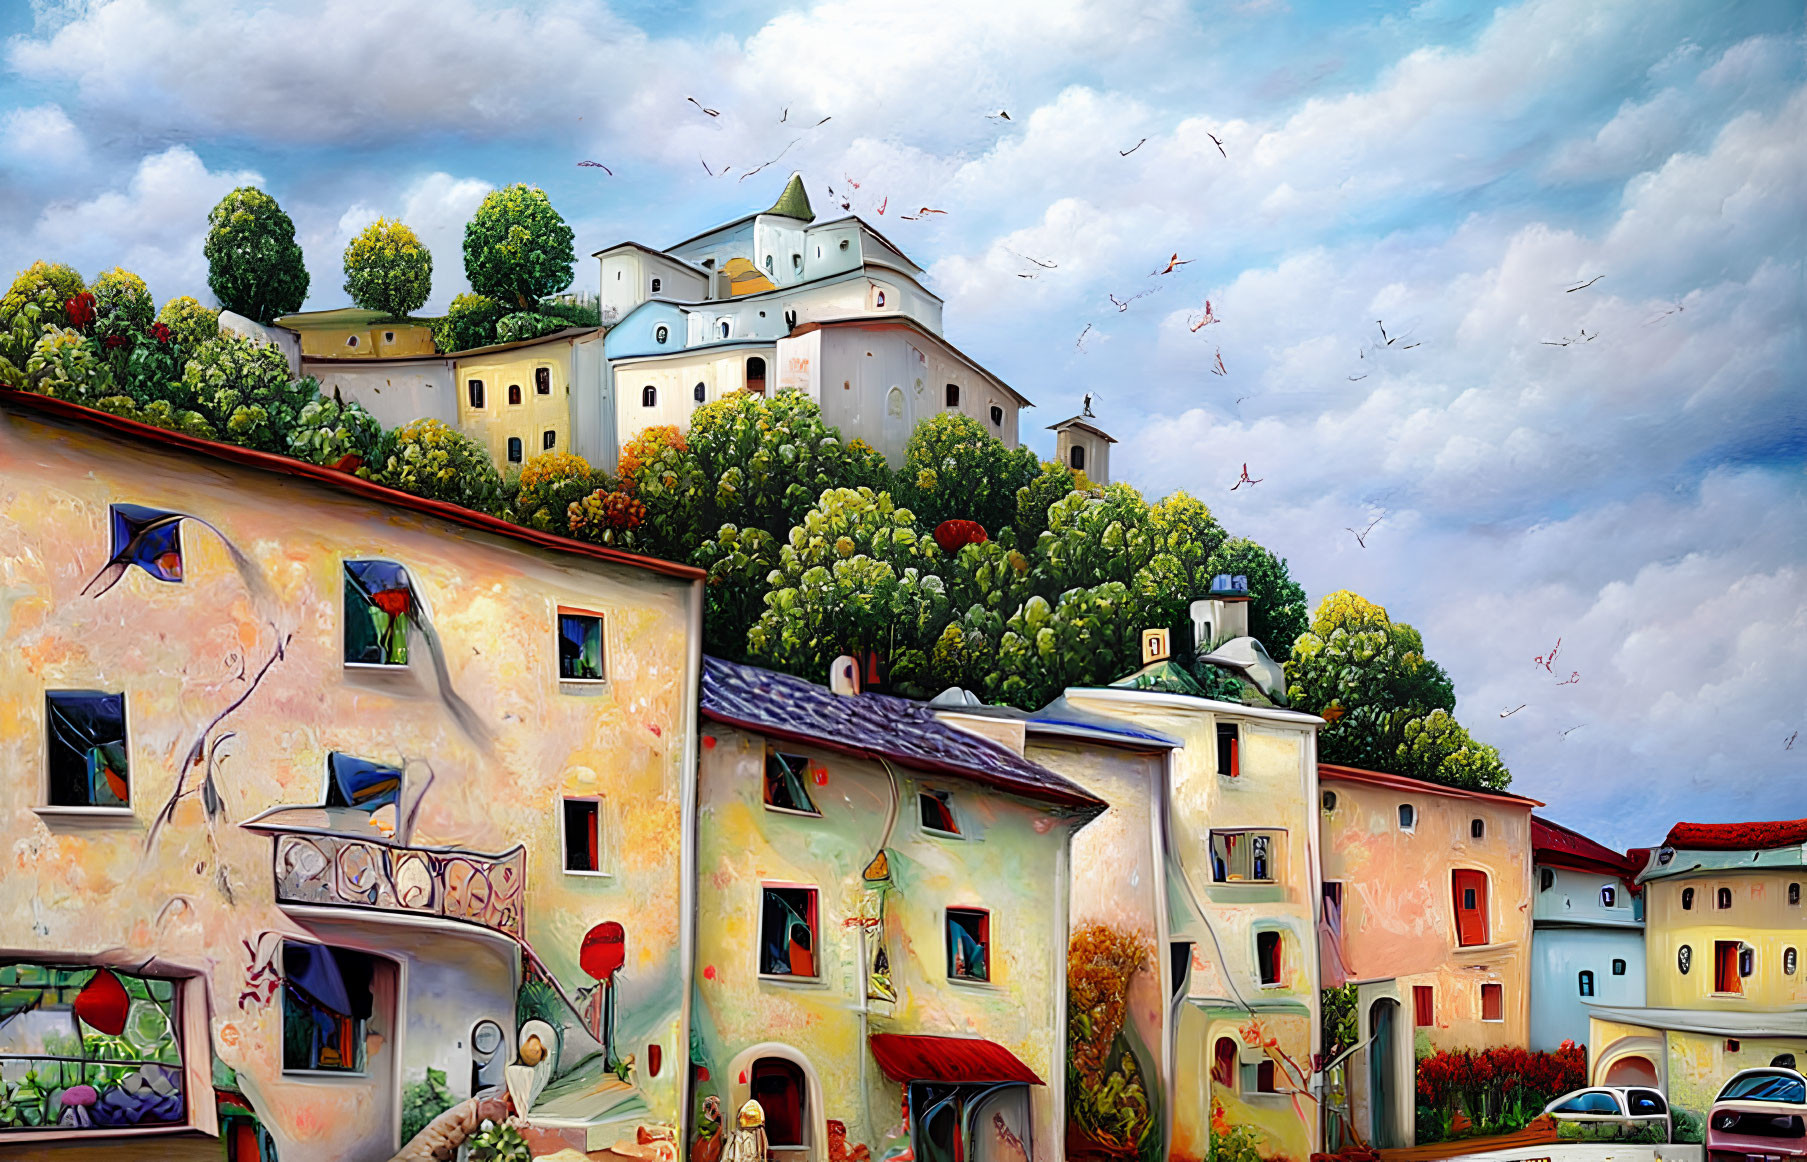 Colorful hilltop village painting with birds and castle under cloudy sky